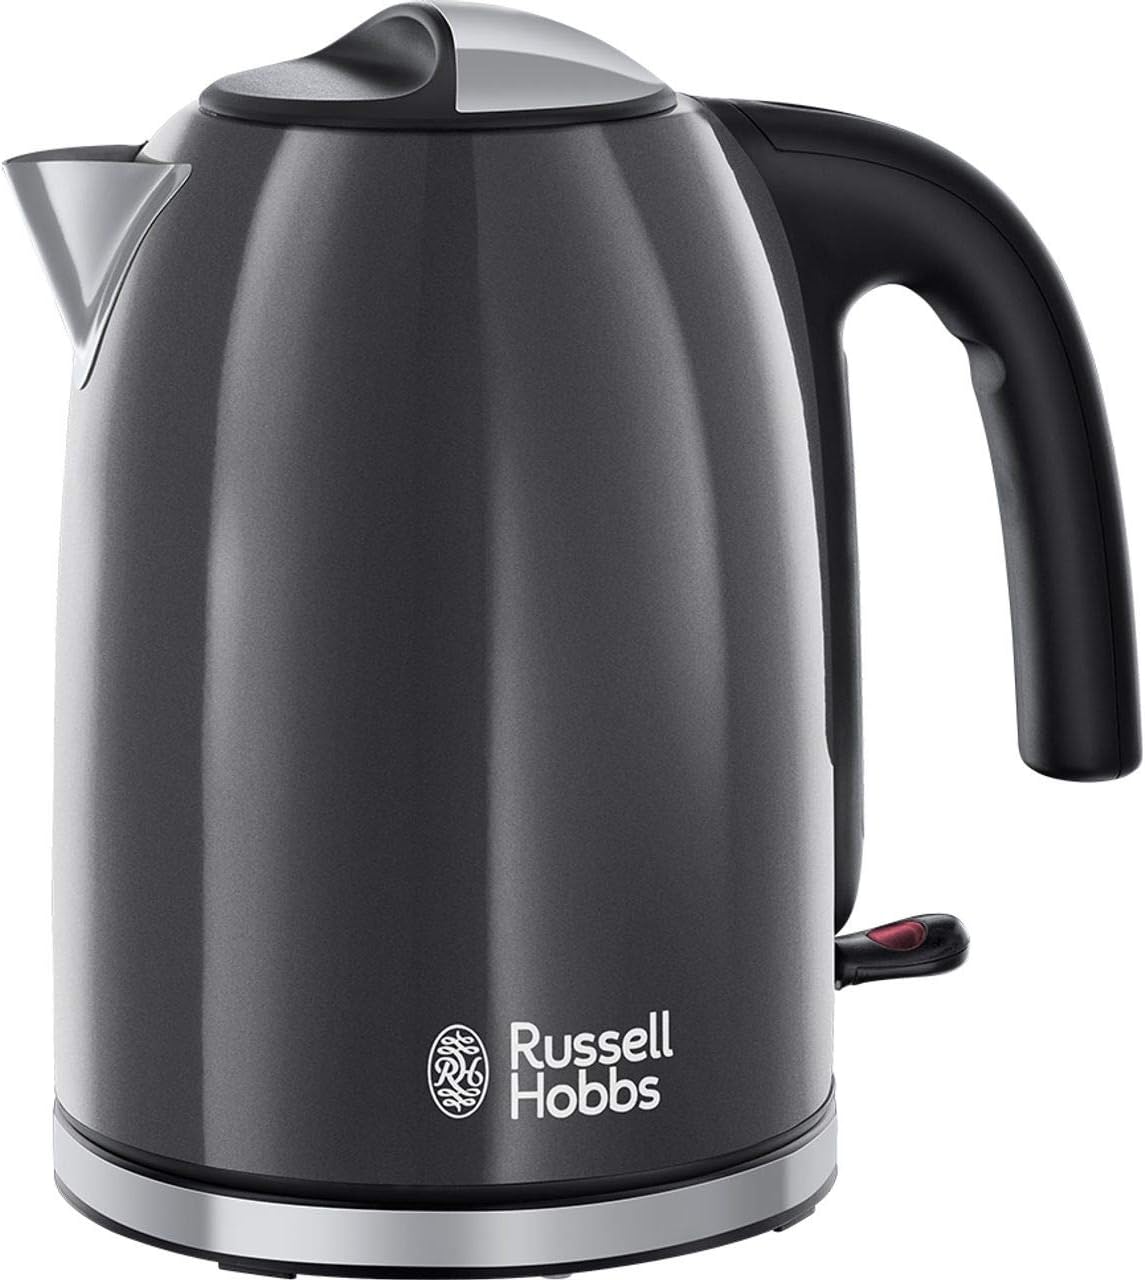 Russell Hobbs Black Stainless Steel 1.7L Cordless Electric Kettle with black handle (Fast Boil 3KW, Removable washable anti - scale filter, Pull to open hinged lid, Perfect pour spout) 20413 - Amazing Gadgets Outlet